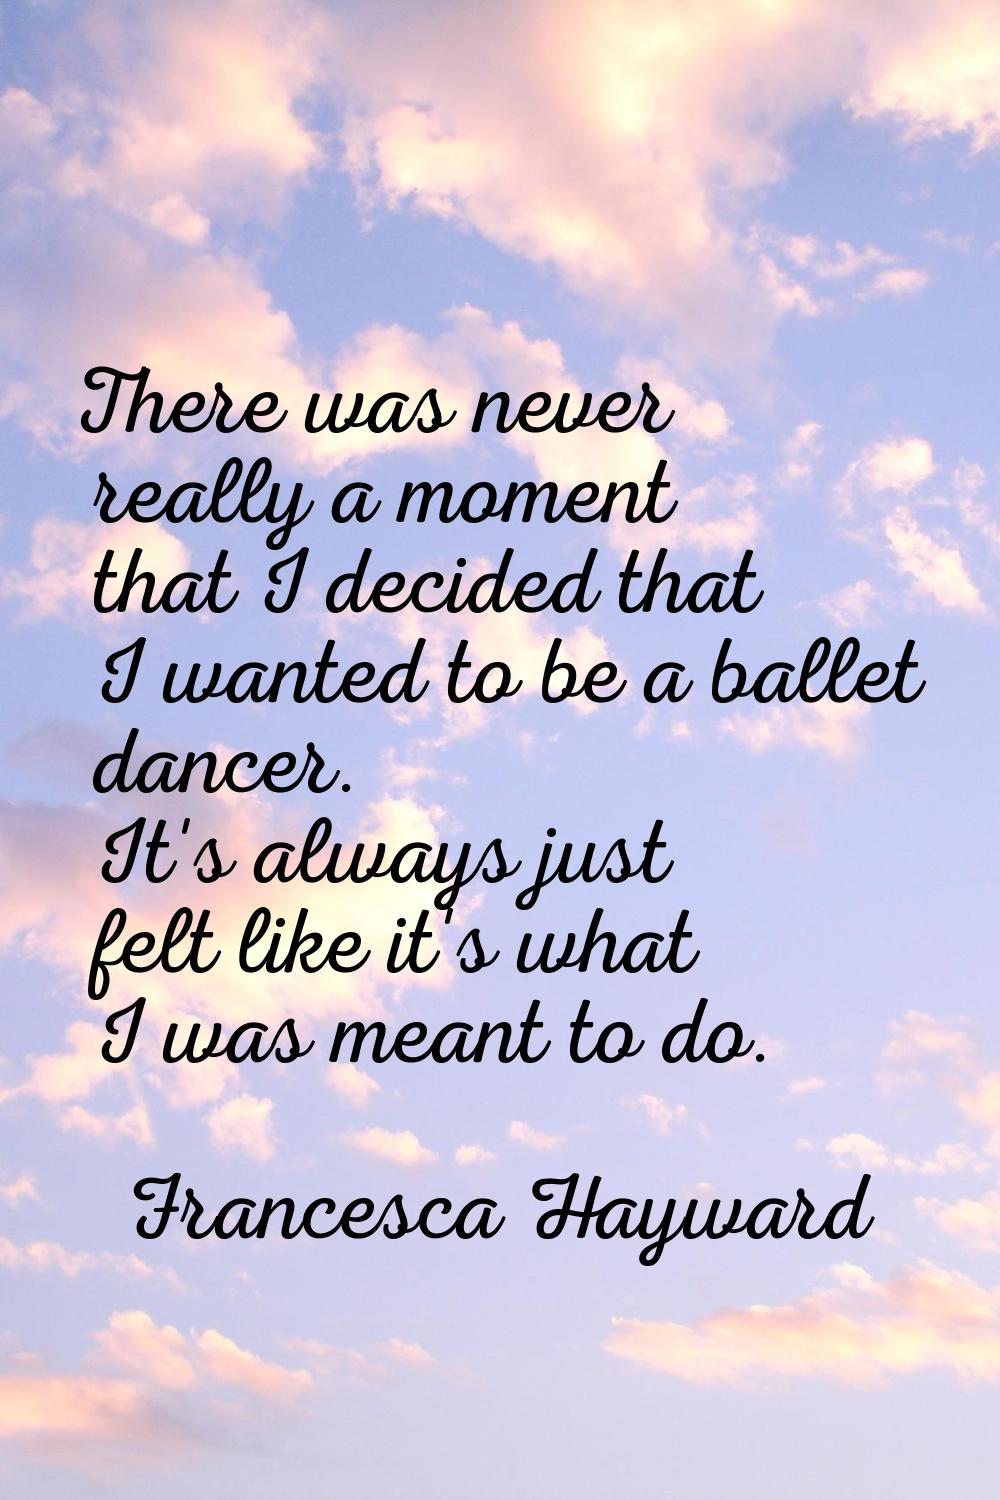 There was never really a moment that I decided that I wanted to be a ballet dancer. It's always jus